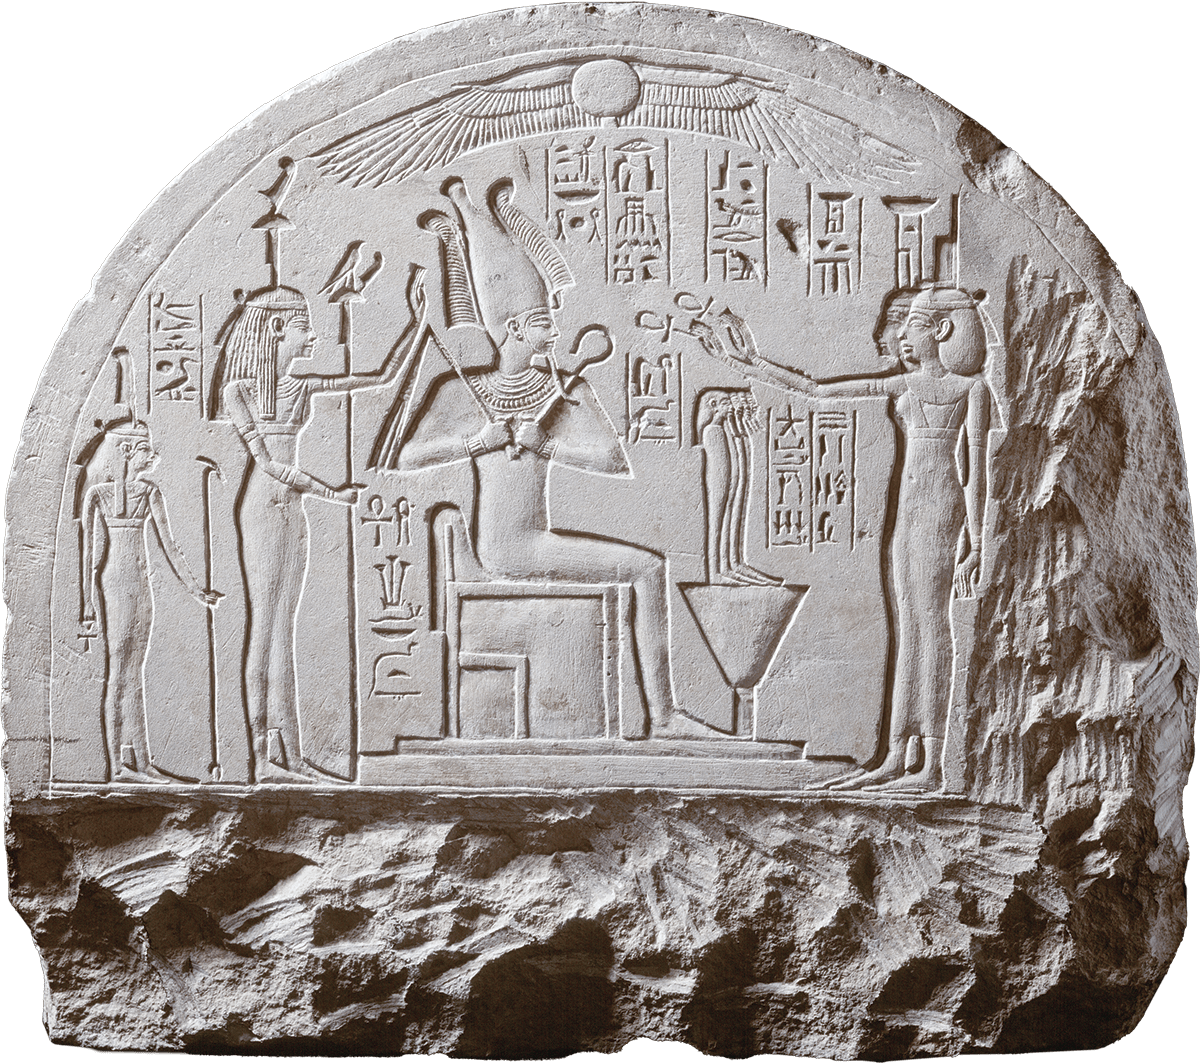 A stone grey stela carved with figures, gods, and hieroglyphs.